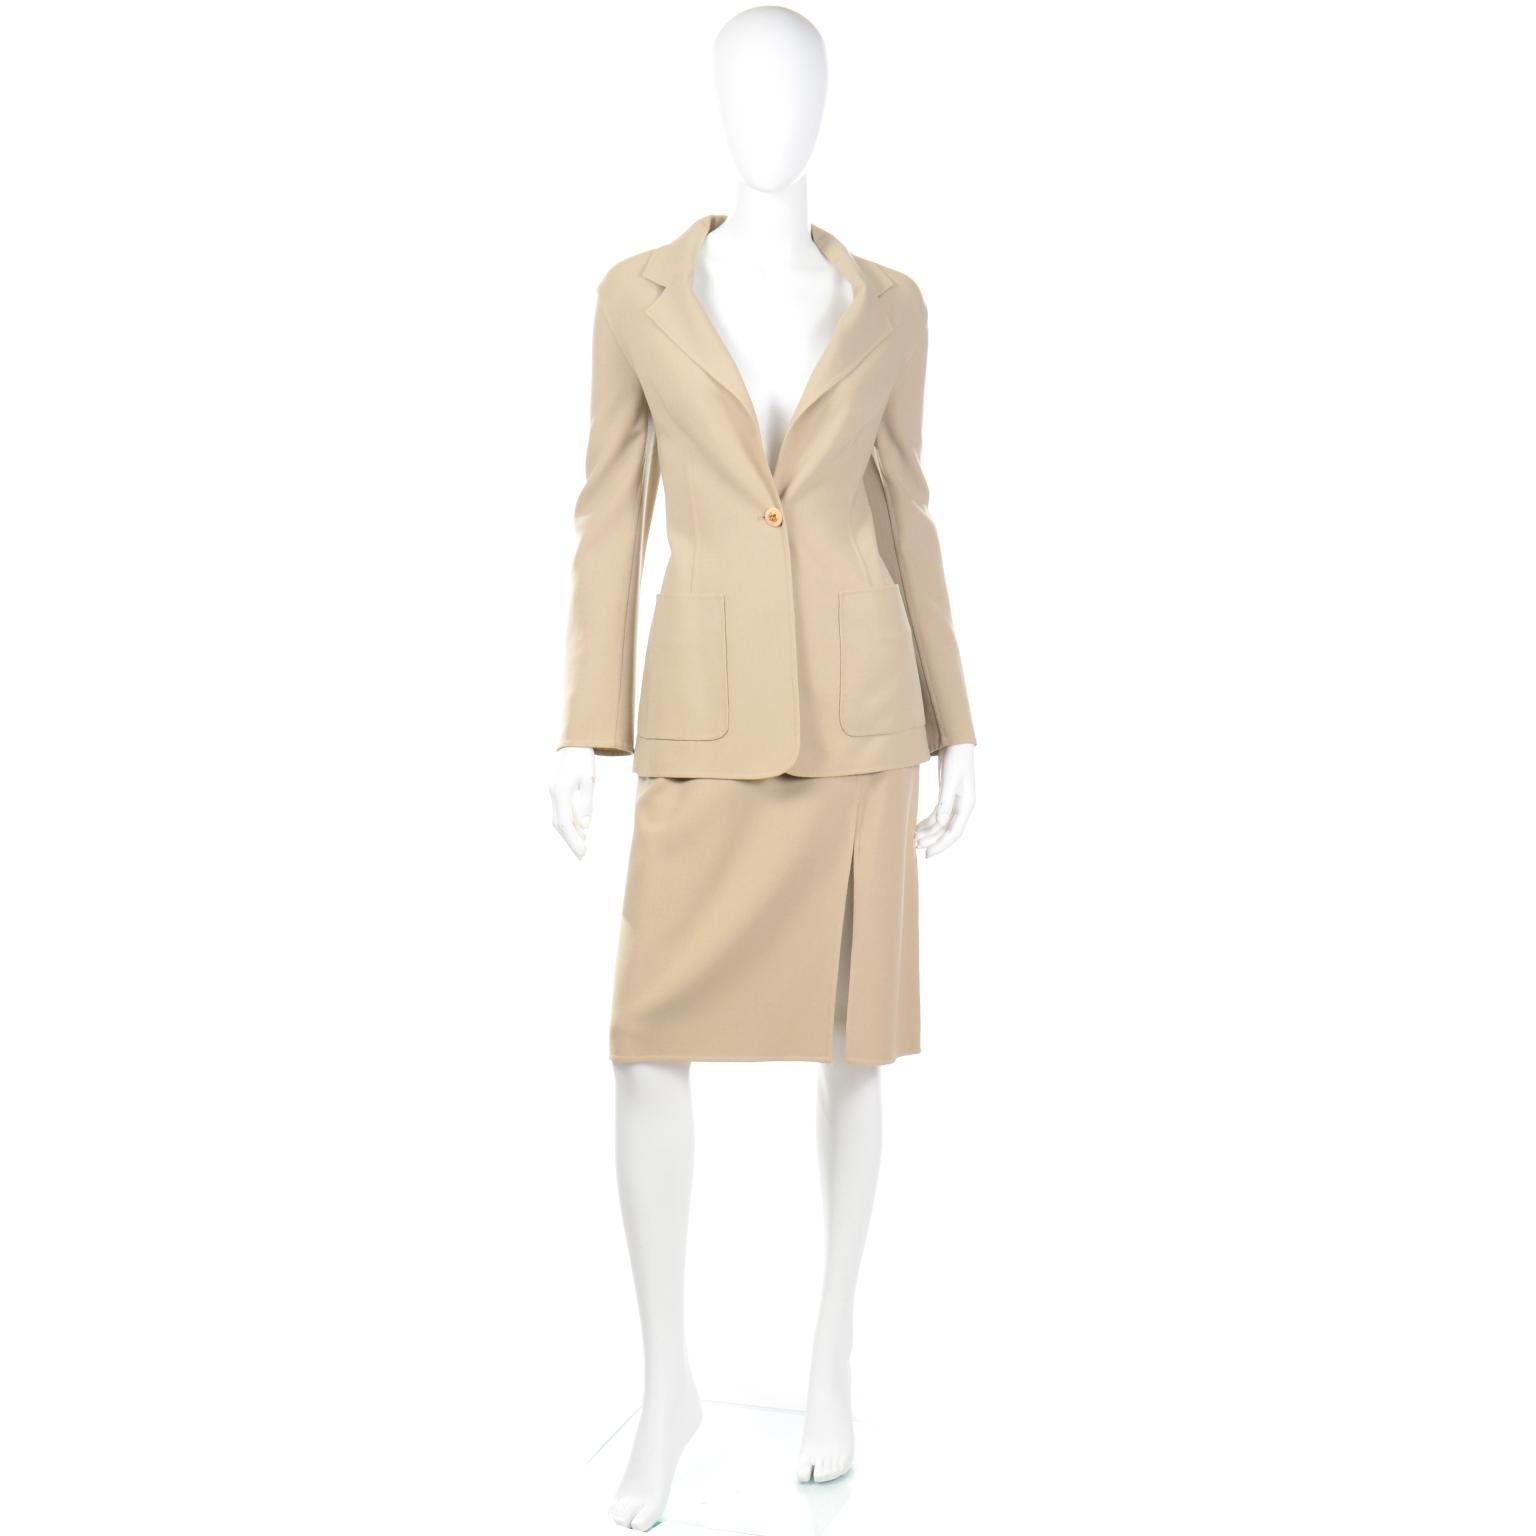 This is a lovely Celine sand colored minimalist monochromatic two piece skirt suit with a single buttoned blazer style jacket. This is such a sophisticated ensemble that can be broken up to be worn as separates. The jacket has front flap pockets and